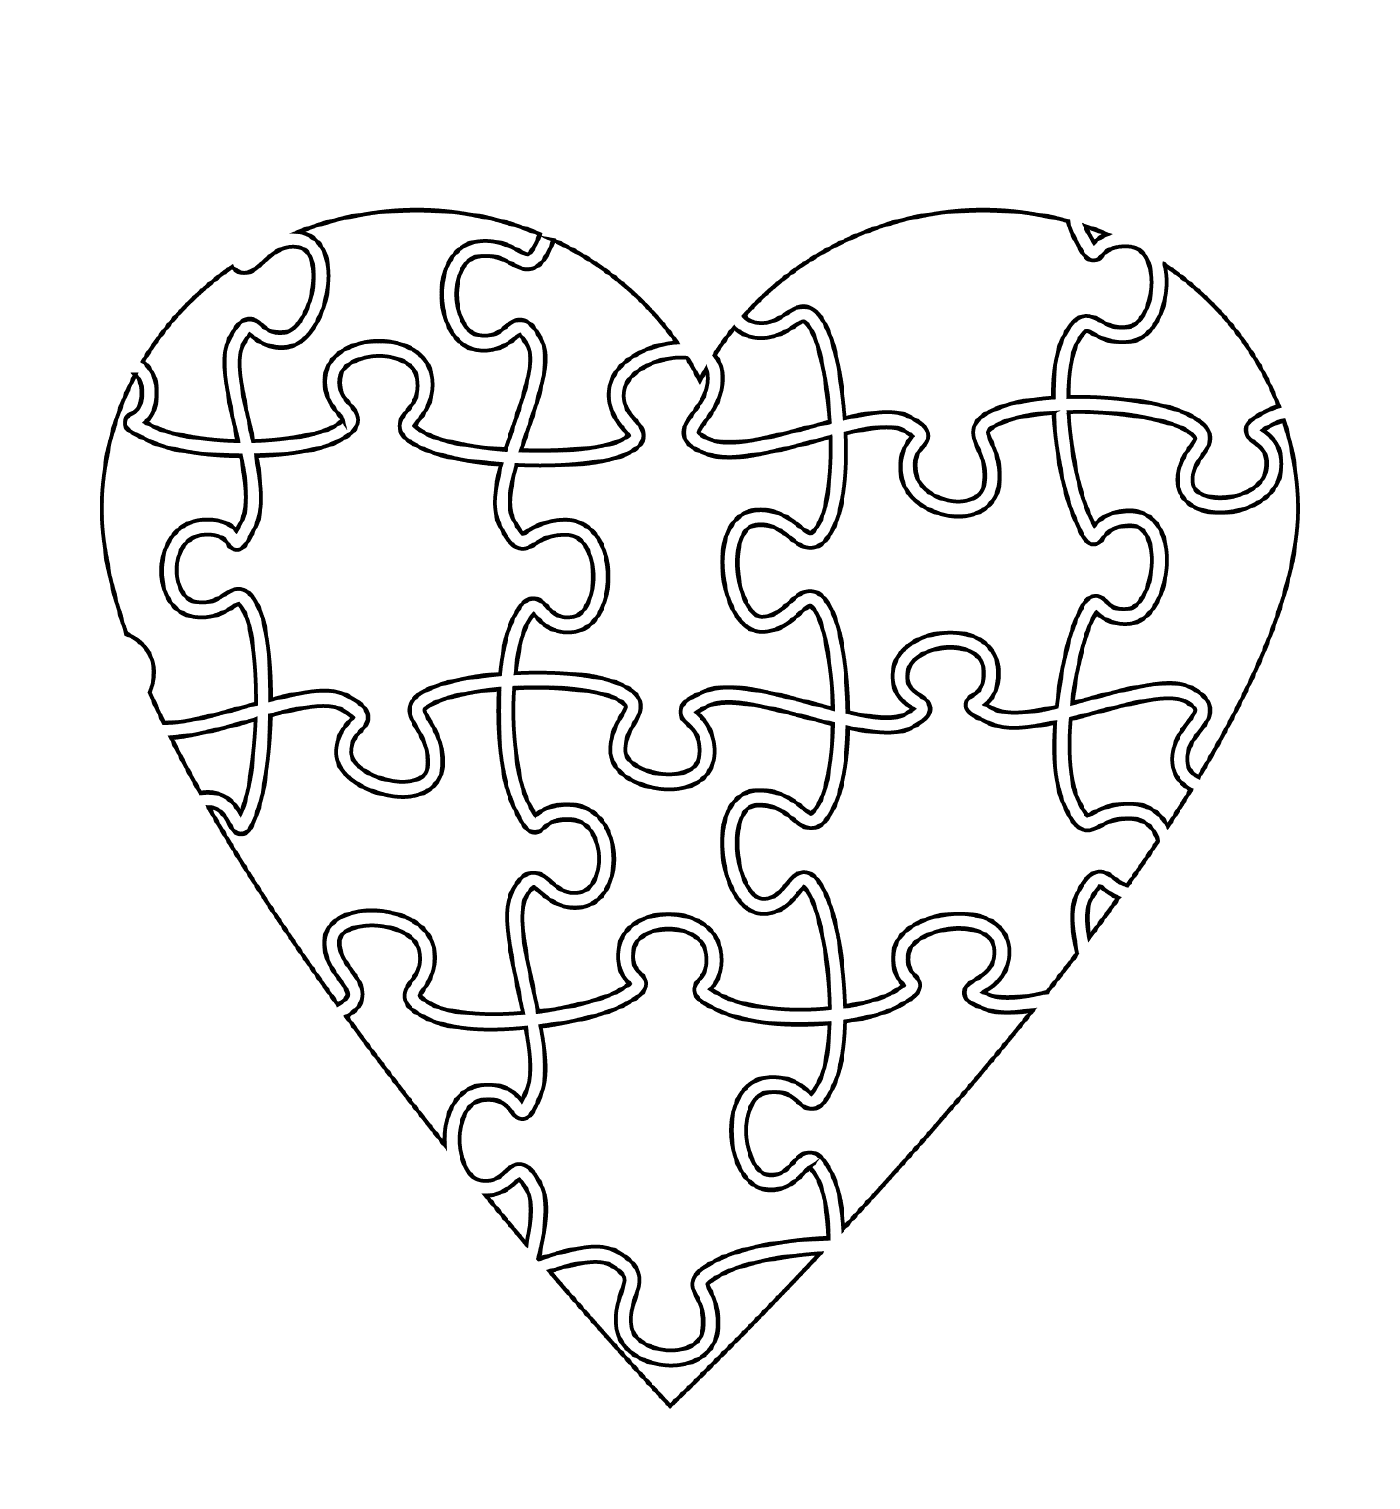  Heart in the shape of a charming puzzle 